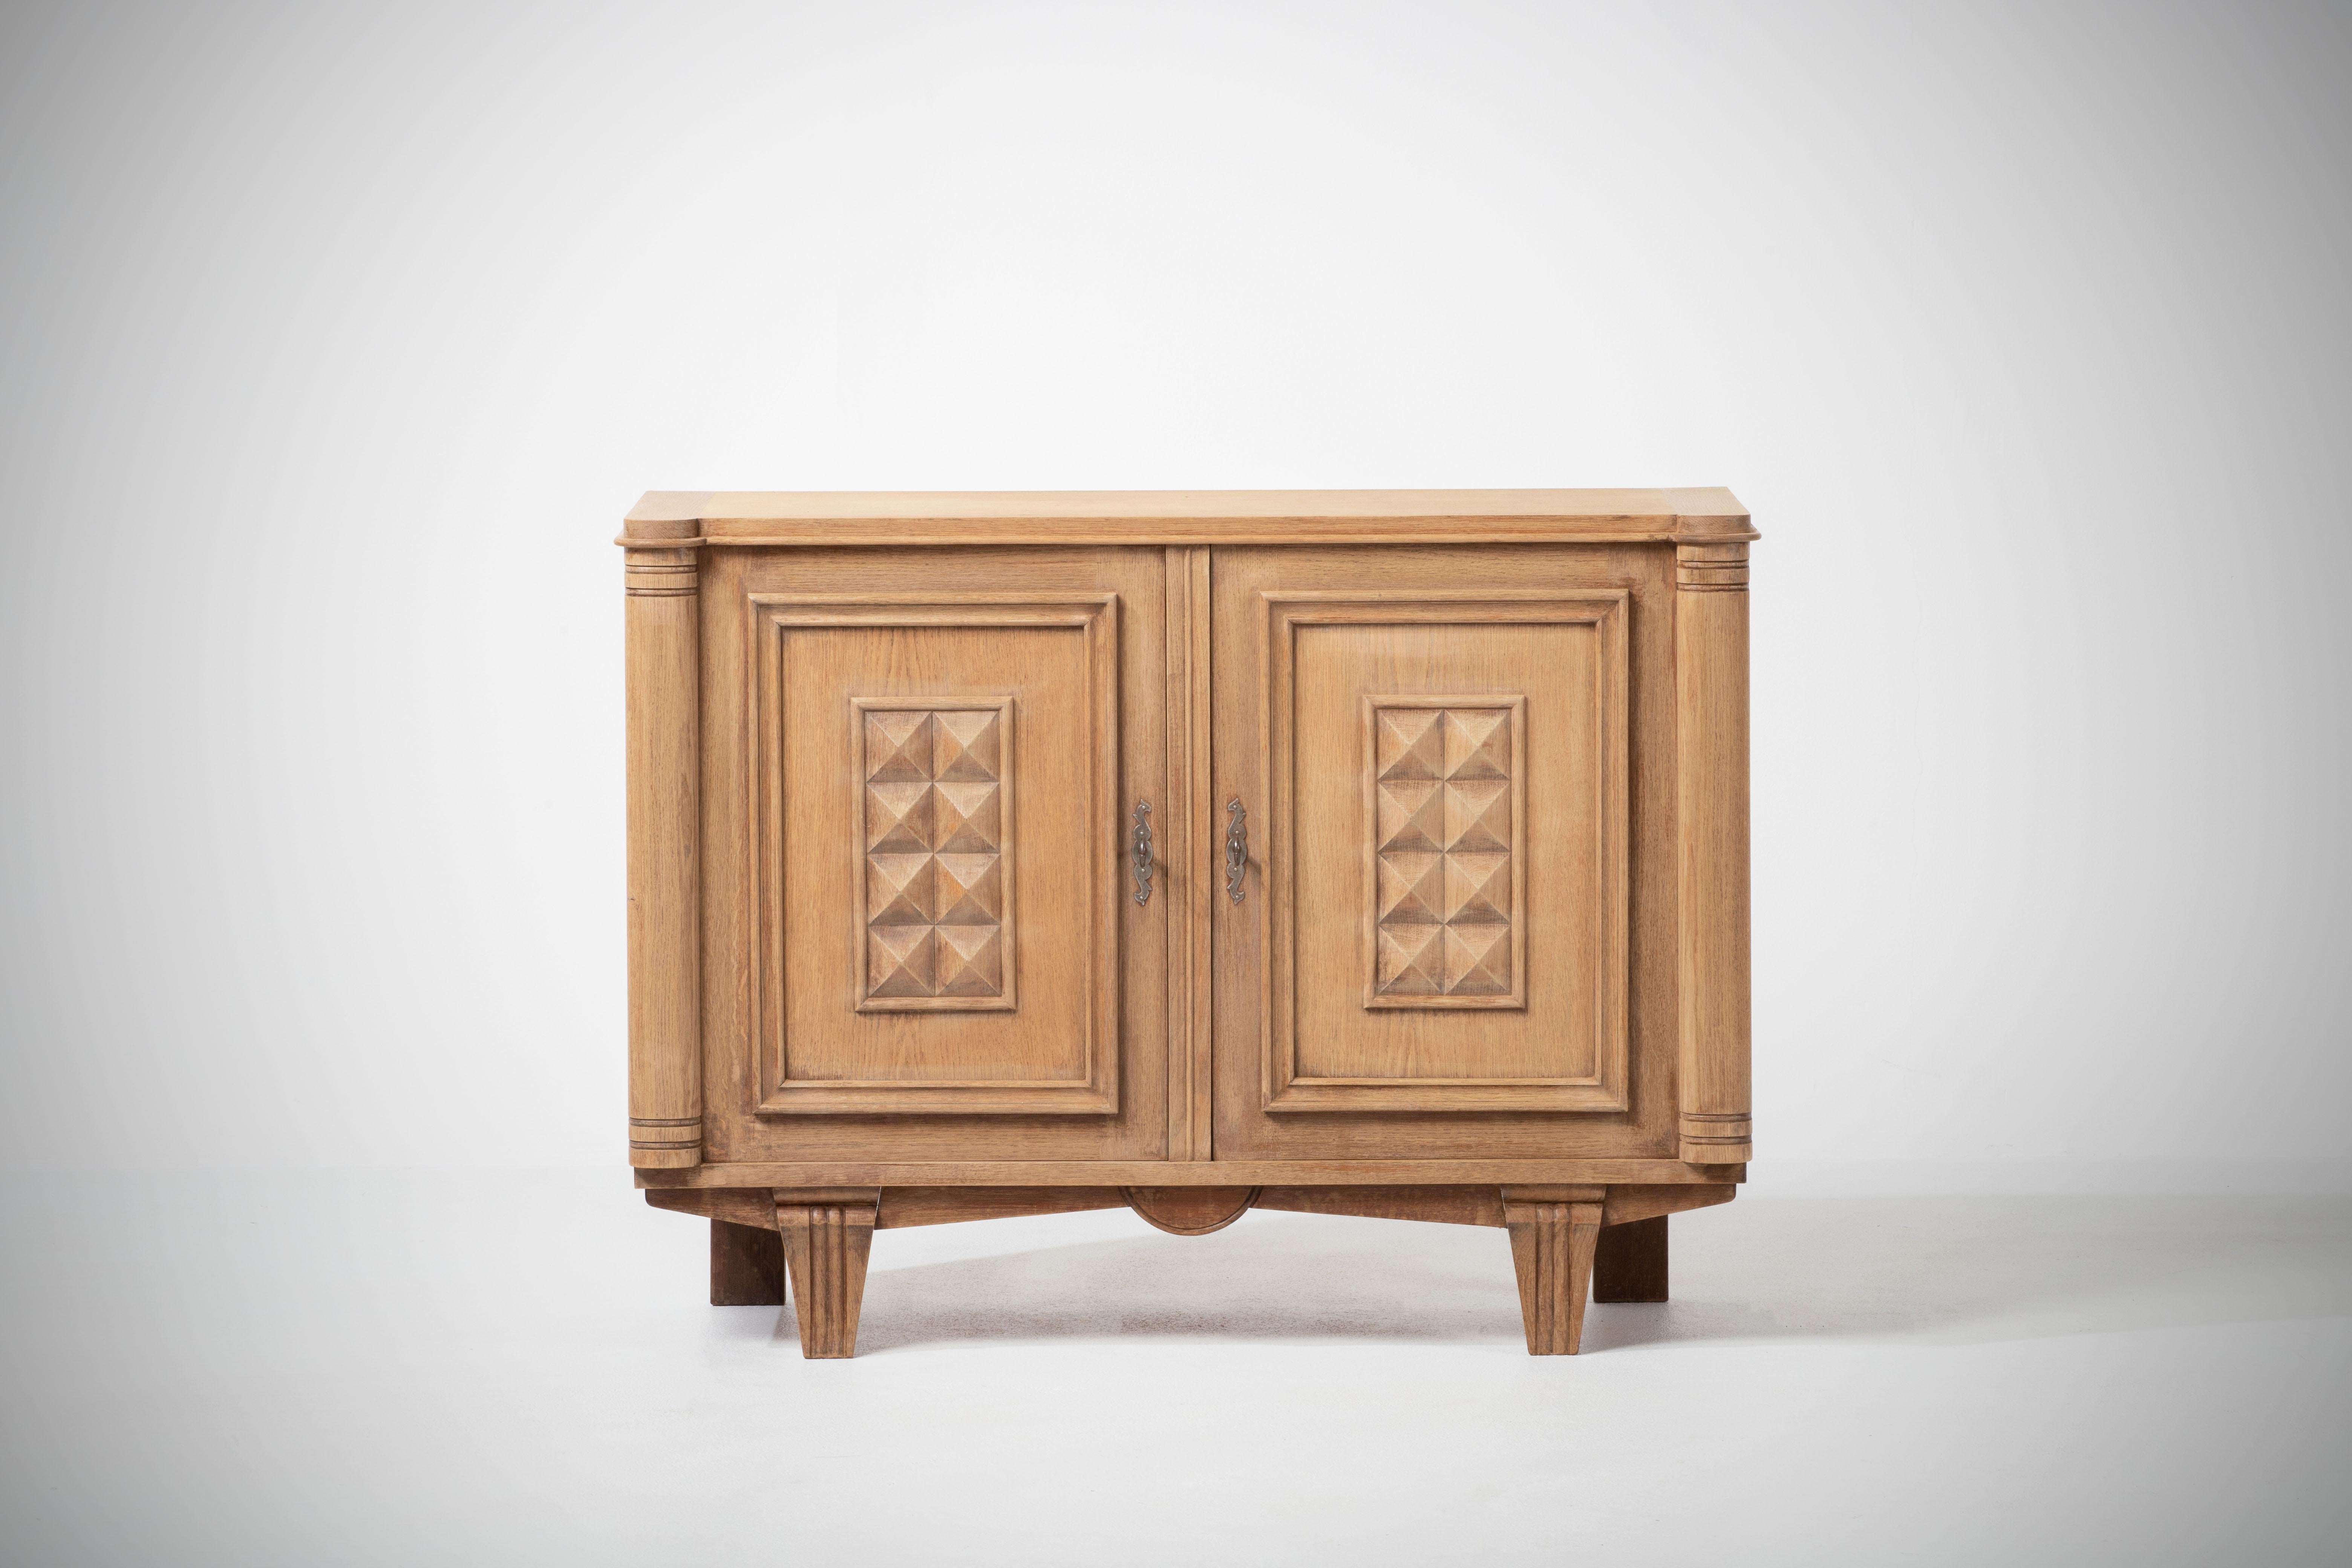 Mid-20th Century Bleached Solid Oak Cabinet with Graphic Details, France, 1940s